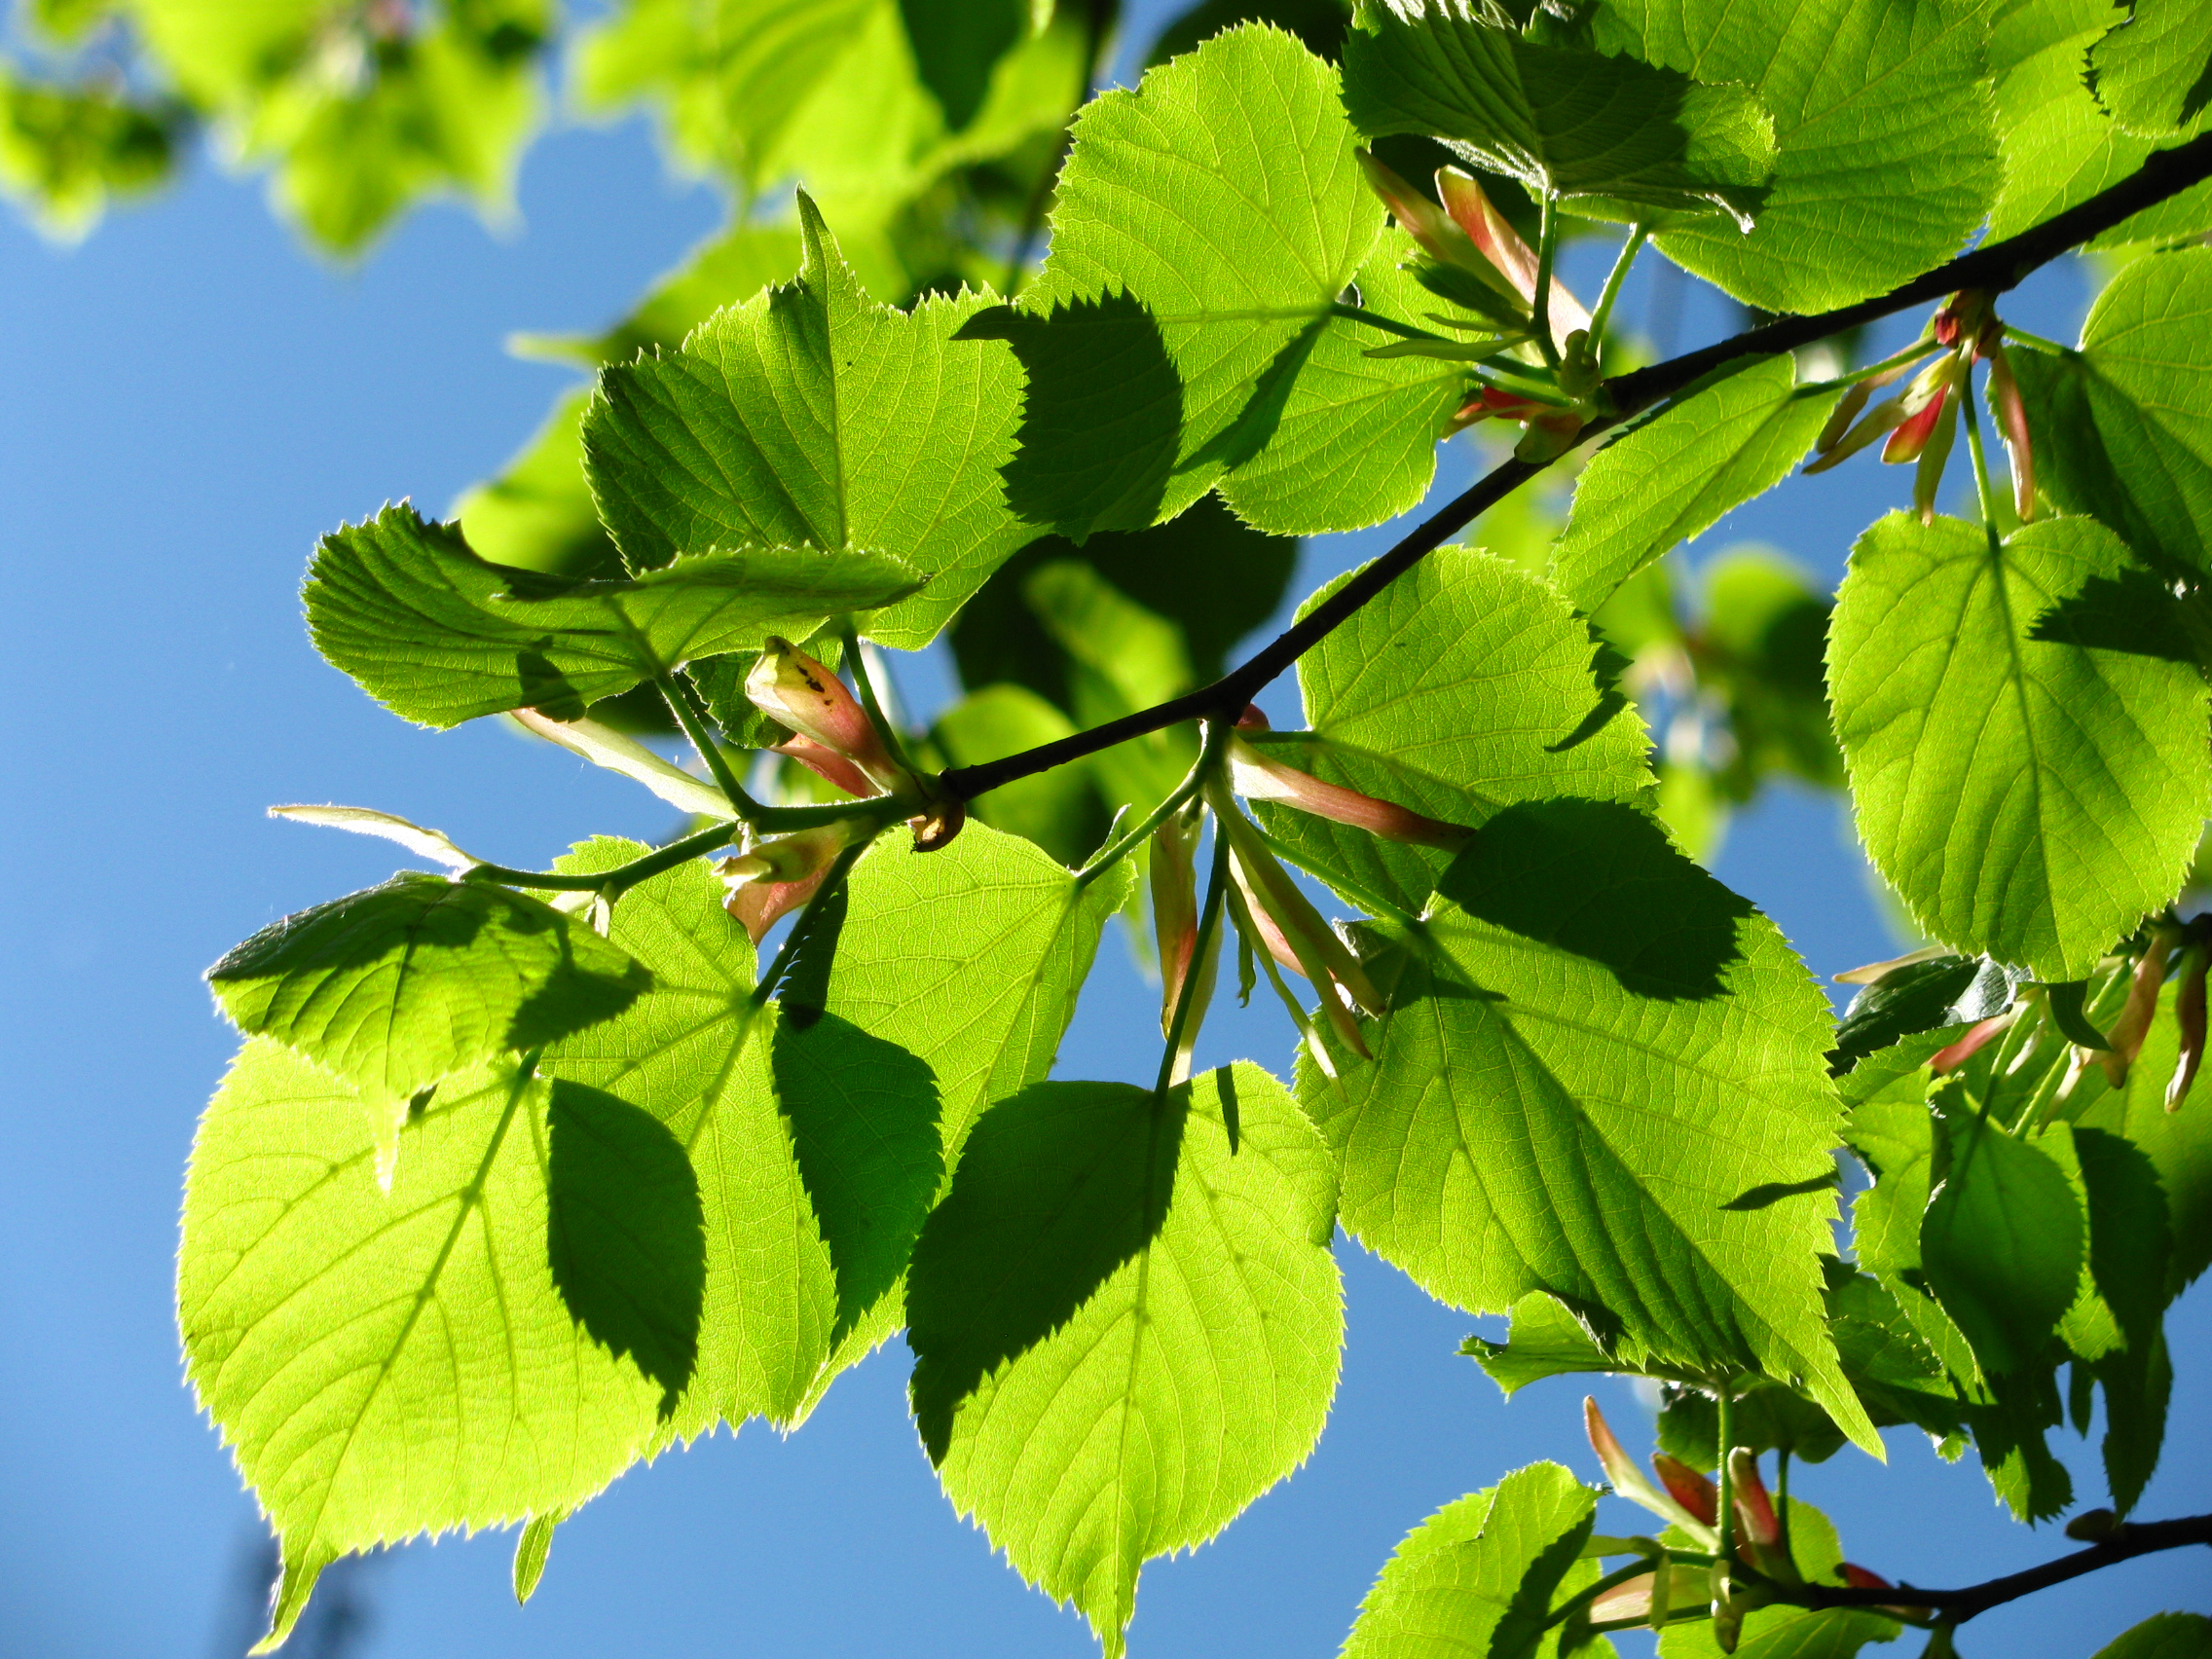 Spring leaves spring pictures of the season - Truly Hand Picked